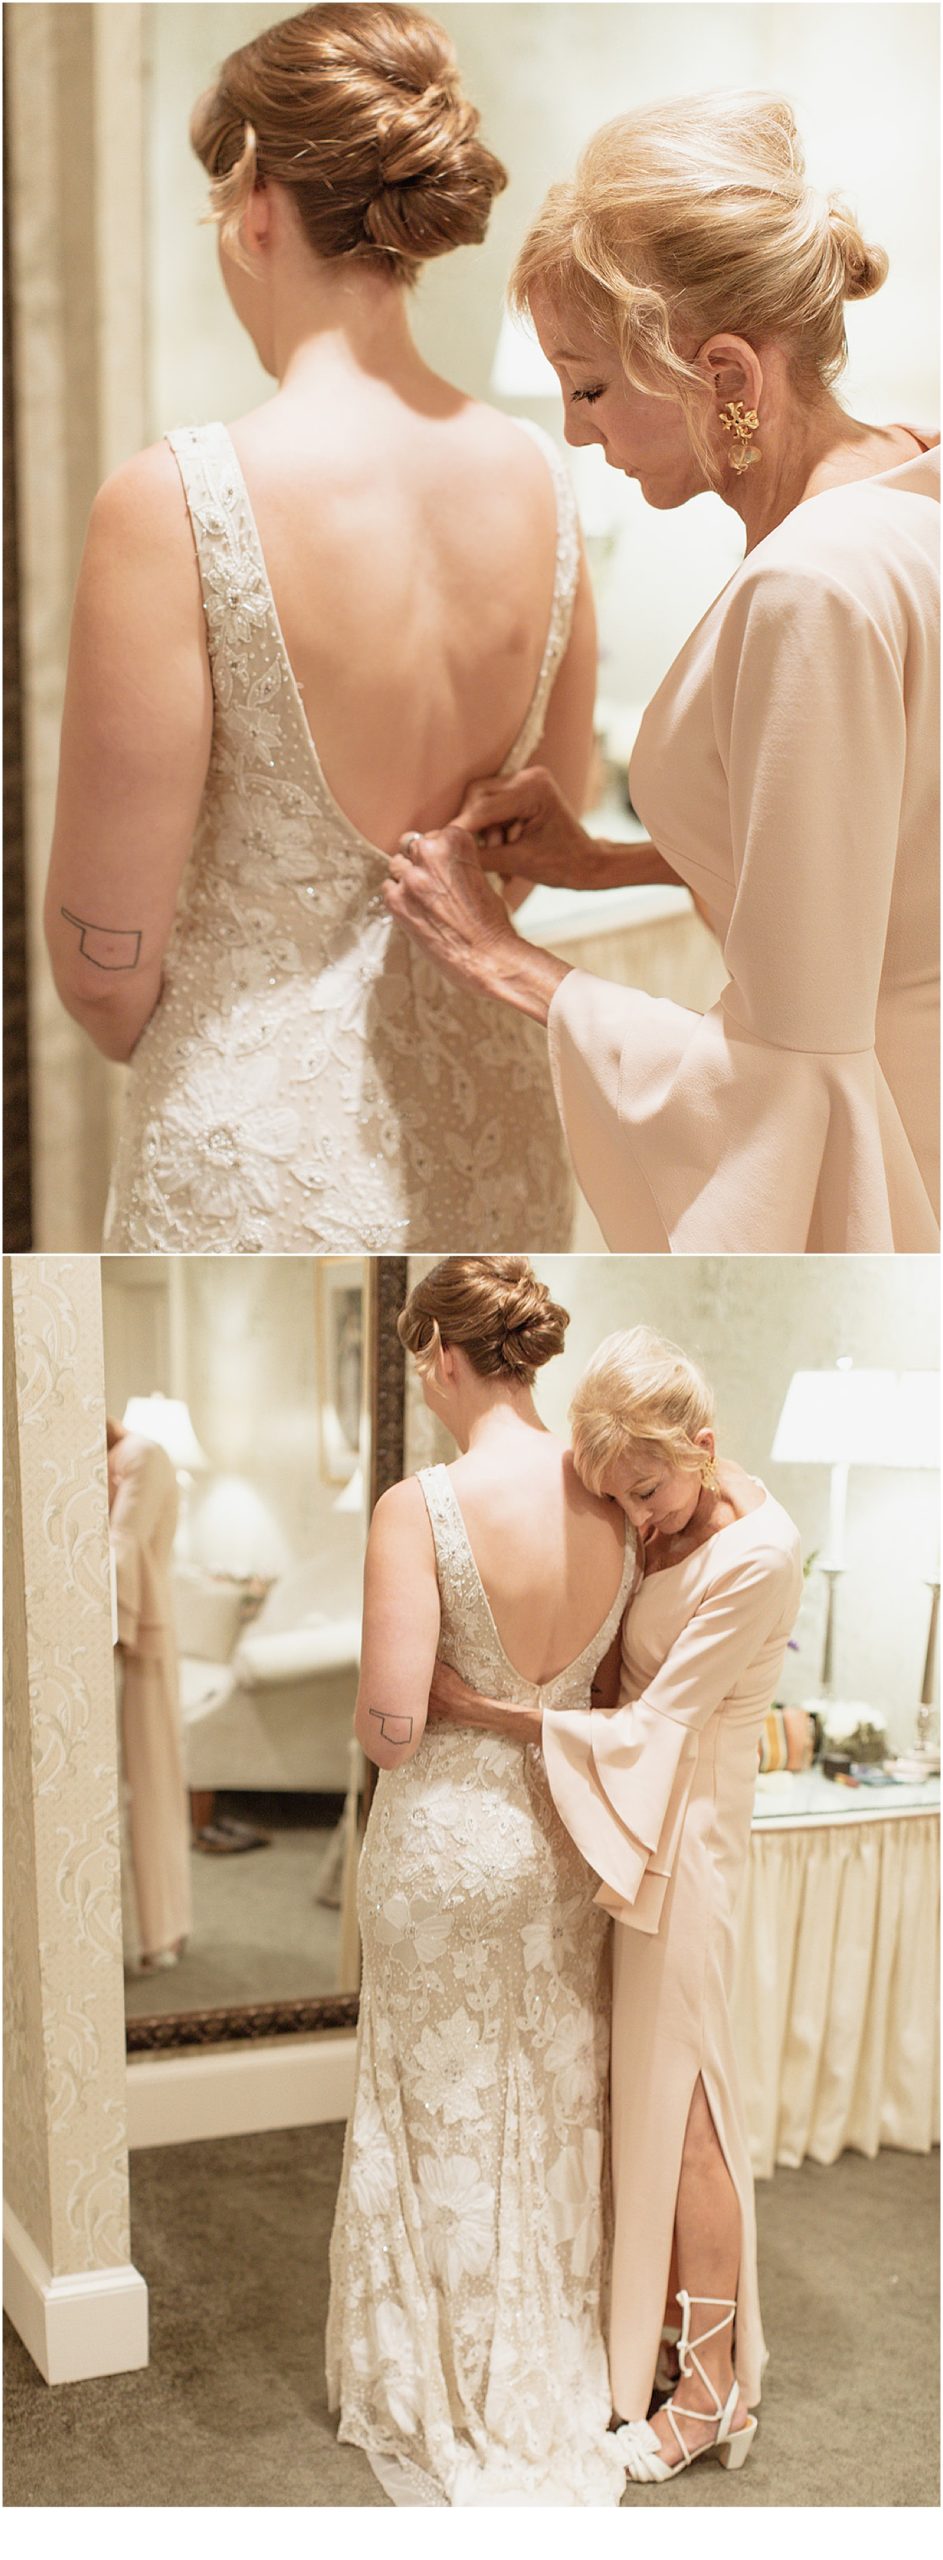 Boston-bride-getting-ready-with-her-mom